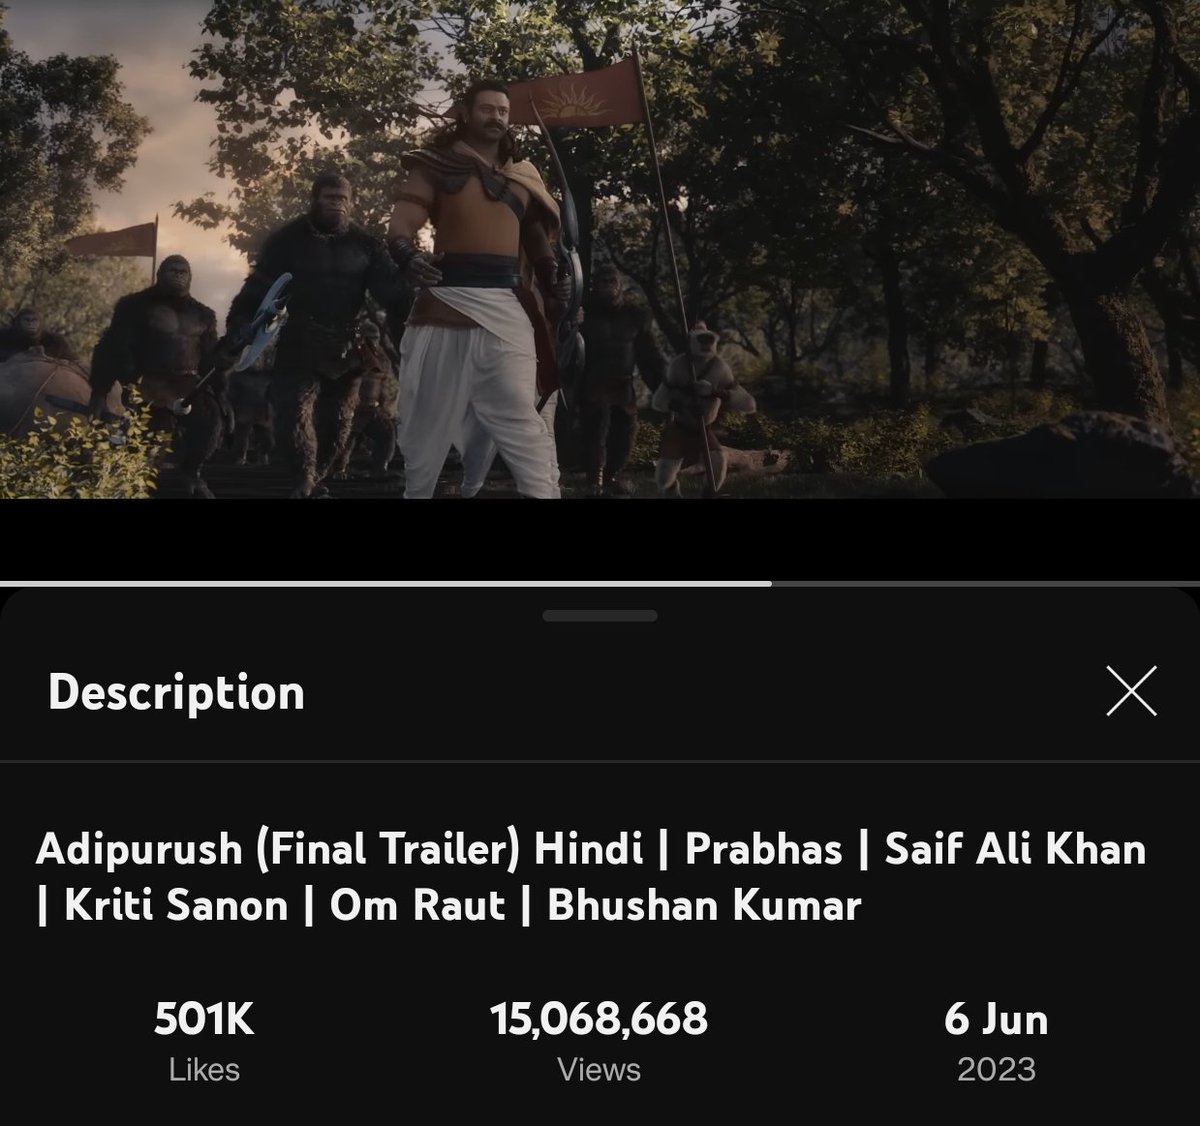 #AdipurushActionTrailer Hits 500K Likes & 15M Views In 14hrs 🔥🔥🔥 #Prabhas

Likes & Views Expectations In 24hrs(?)